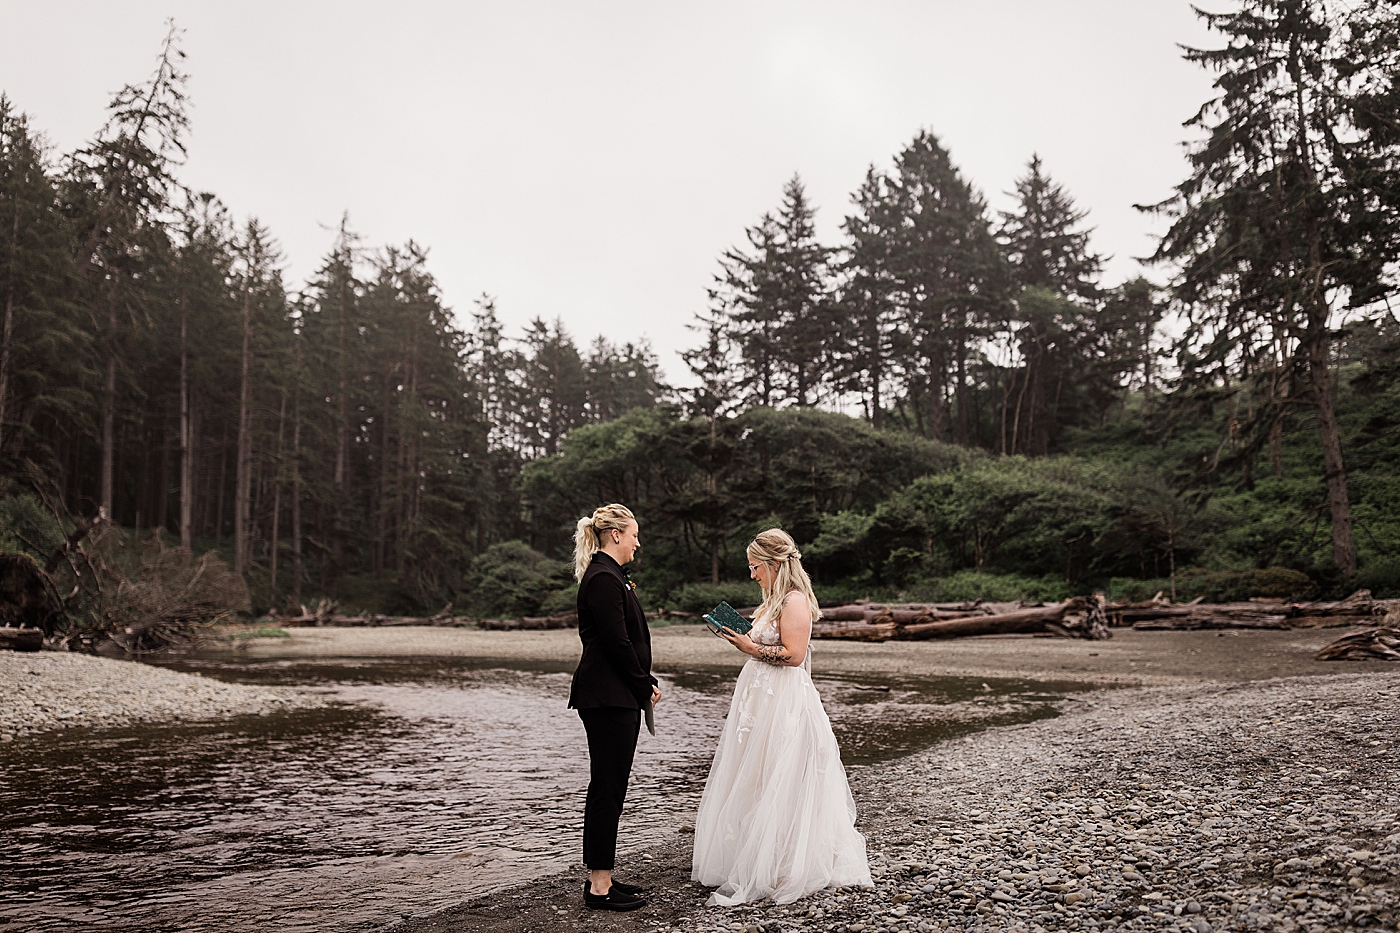 Couple exchanges vows on beach in Olympic National Park. Photo by Megan Montalvo Photography.